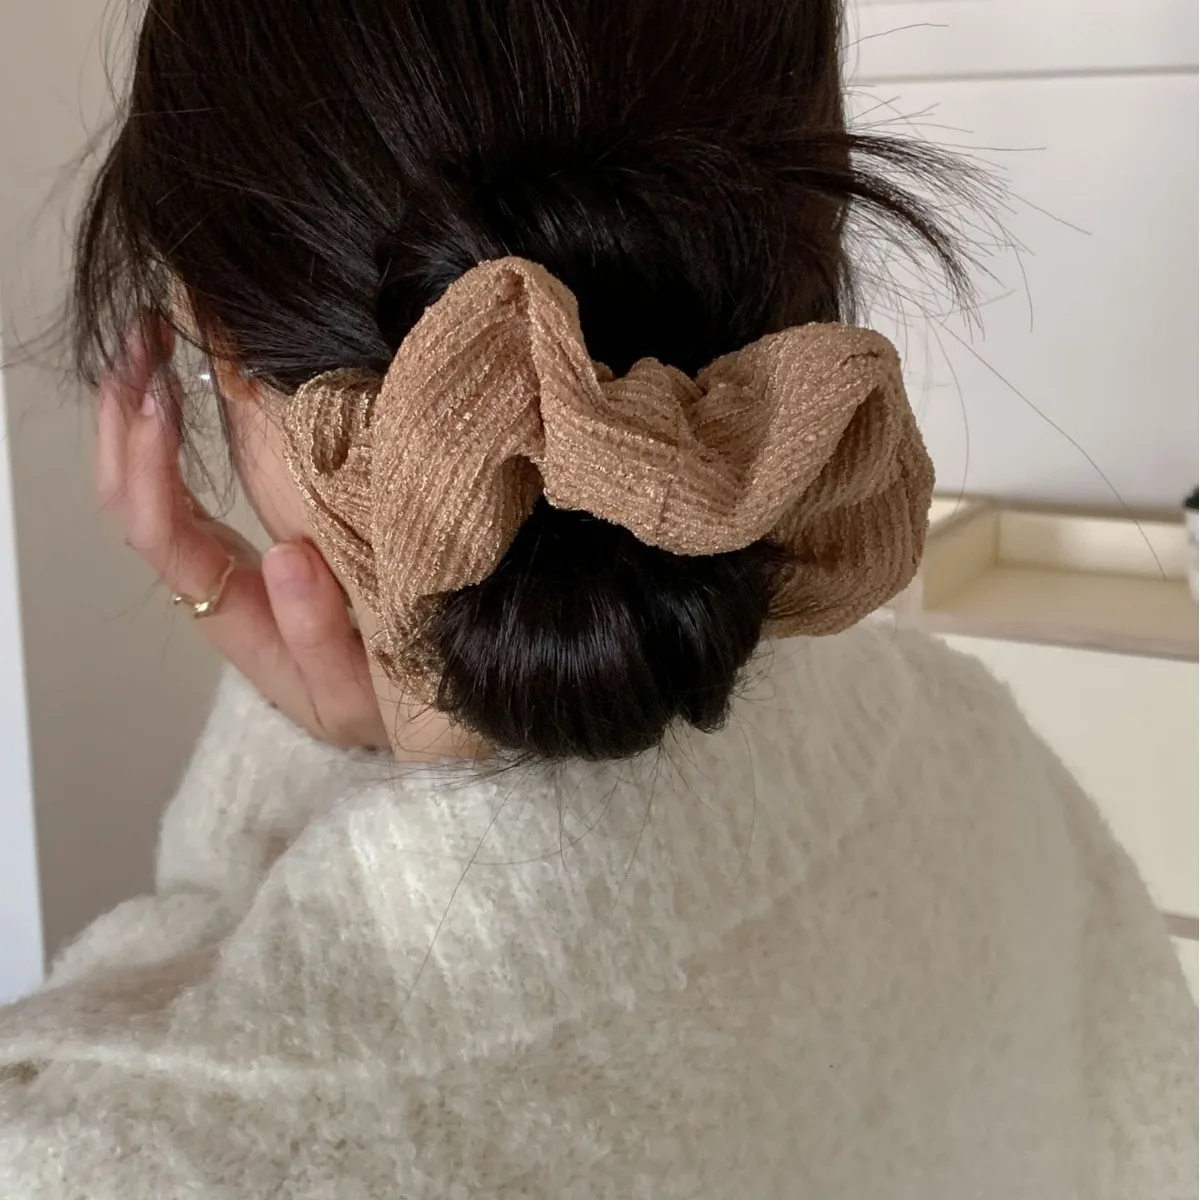 New Woman Simplicity fold Scrunchies Senior Elastic Hairband Girls Rubber Band Lady Hair Ties Ponytail Holder Hair Accessories